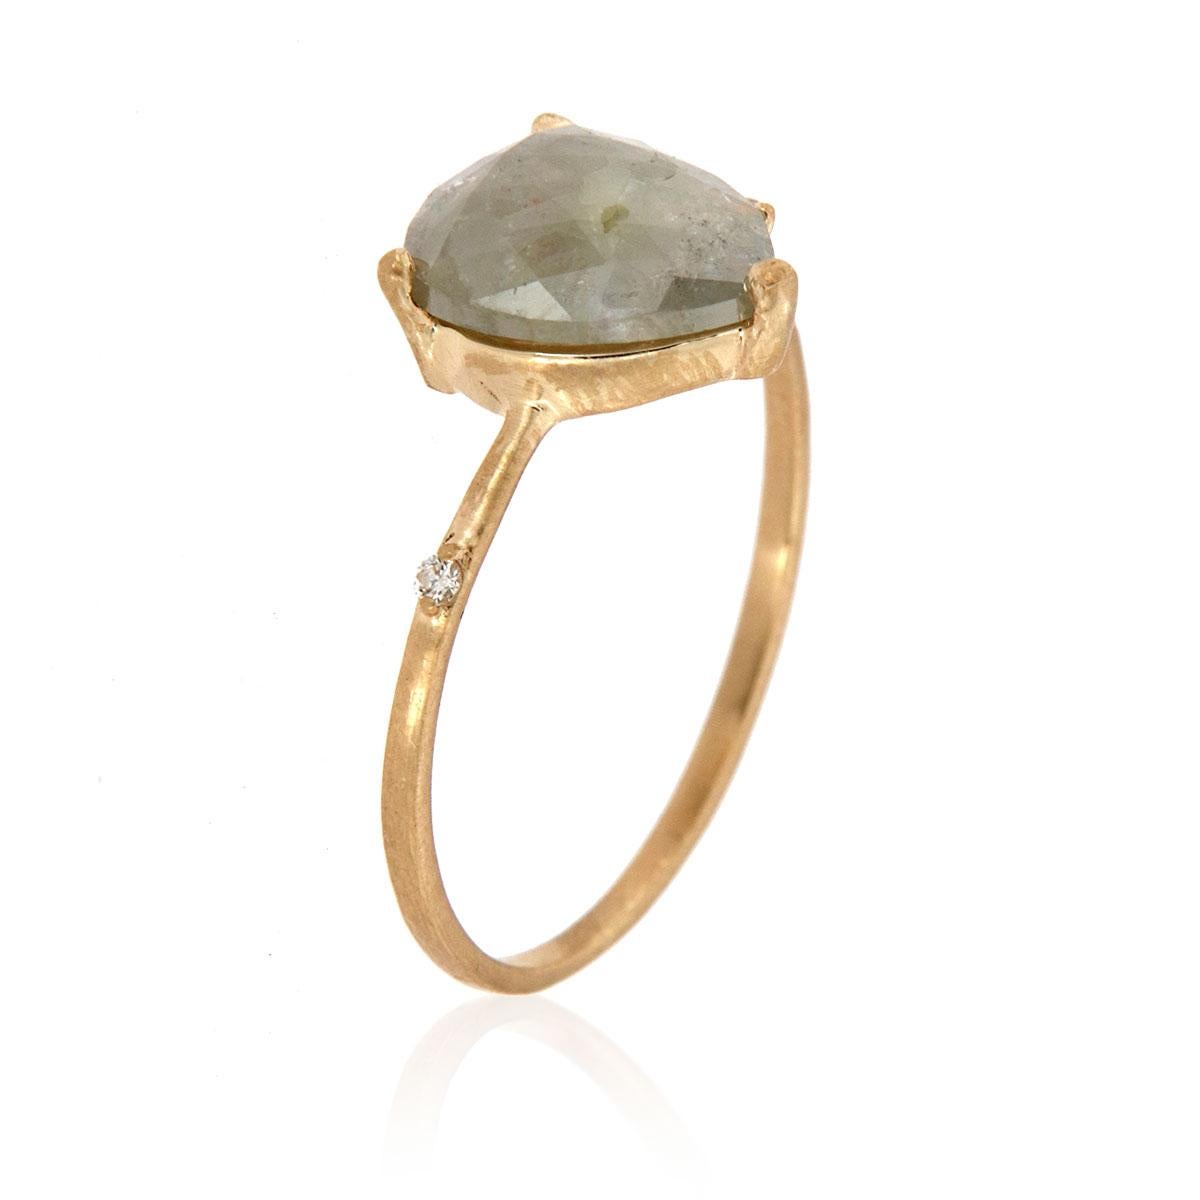 This delicately handcrafted one-of-a-kind rustic, organically designed ring features an Icey color 1.59-carat rosetta cut pear shape natural diamond. Four round diamonds are scattered unevenly on a 1.2 mm wide lightly hammered matte-finished shank